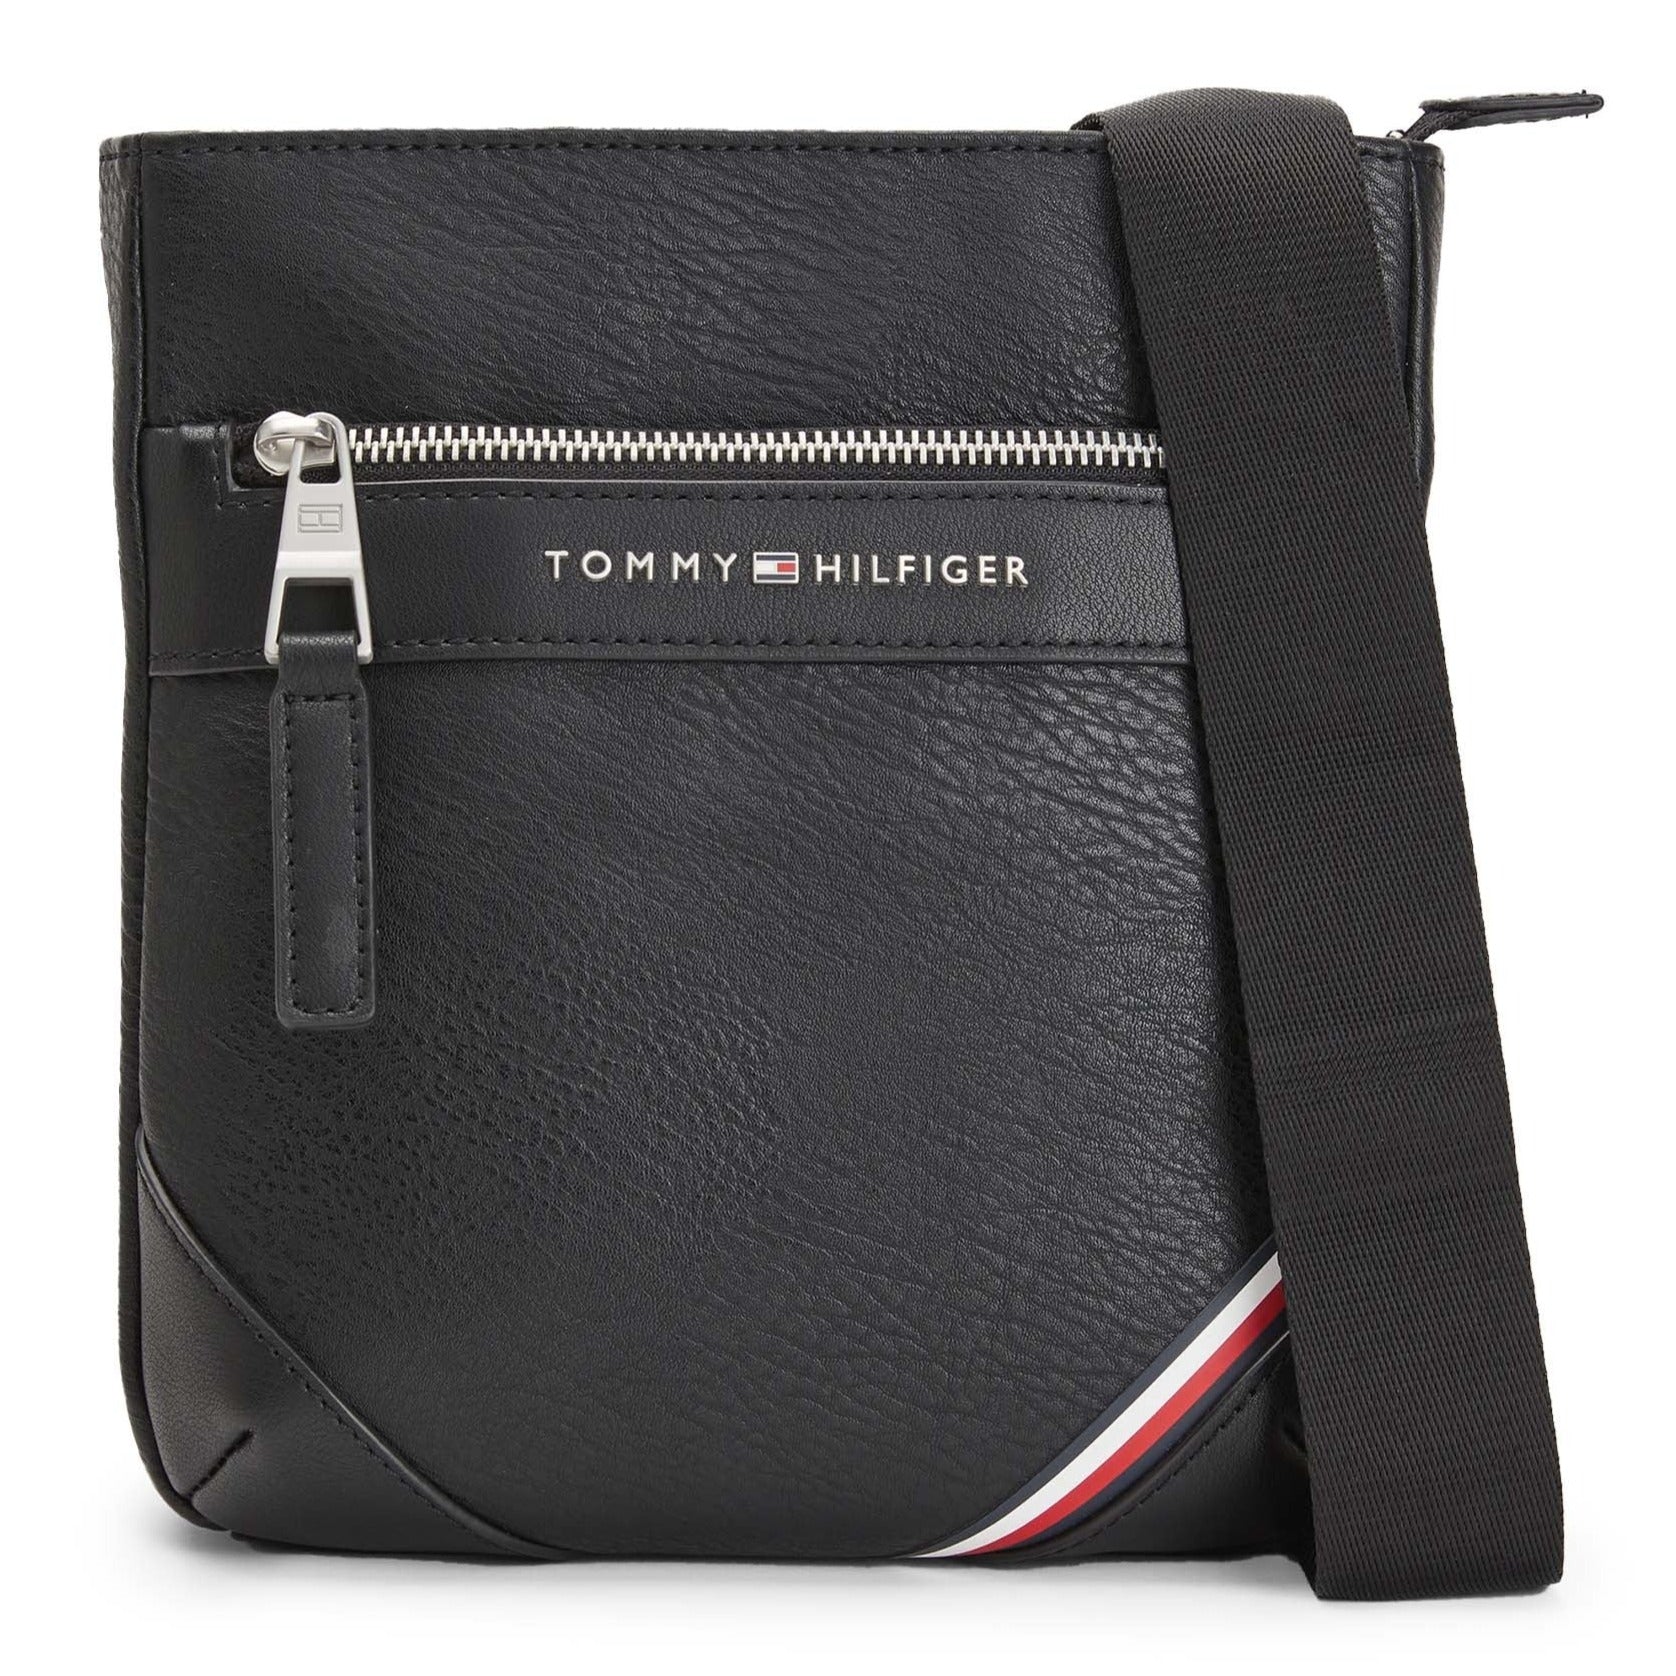 Sacoche Tommy Hilfiger noire | Georgespaul